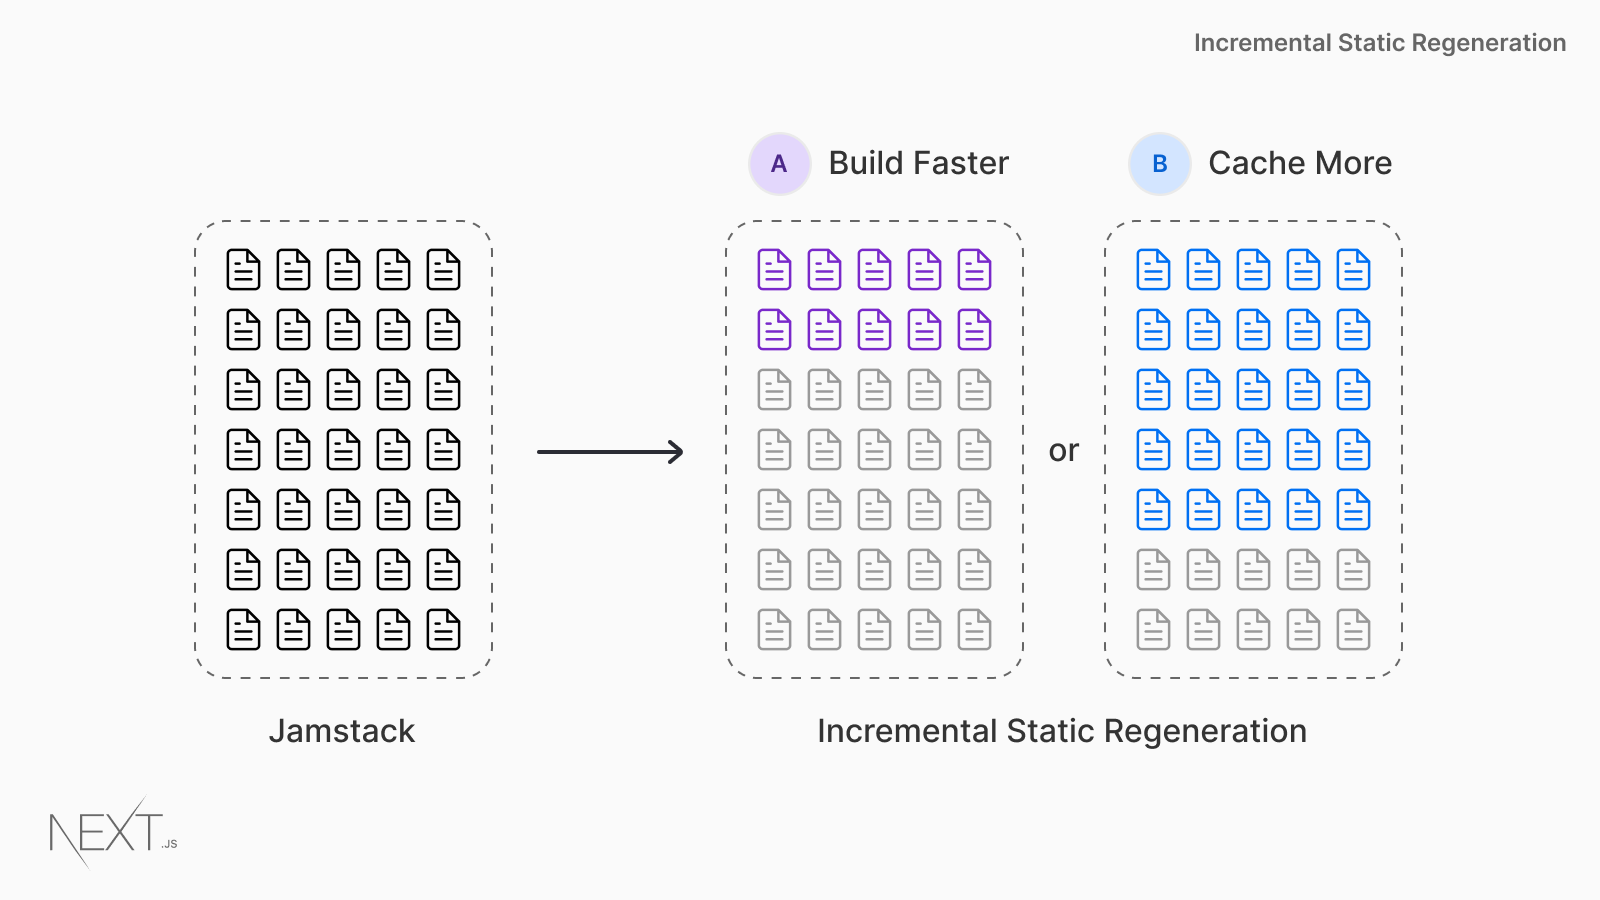 A Complete Guide To Incremental Static Regeneration (ISR) With Next.js